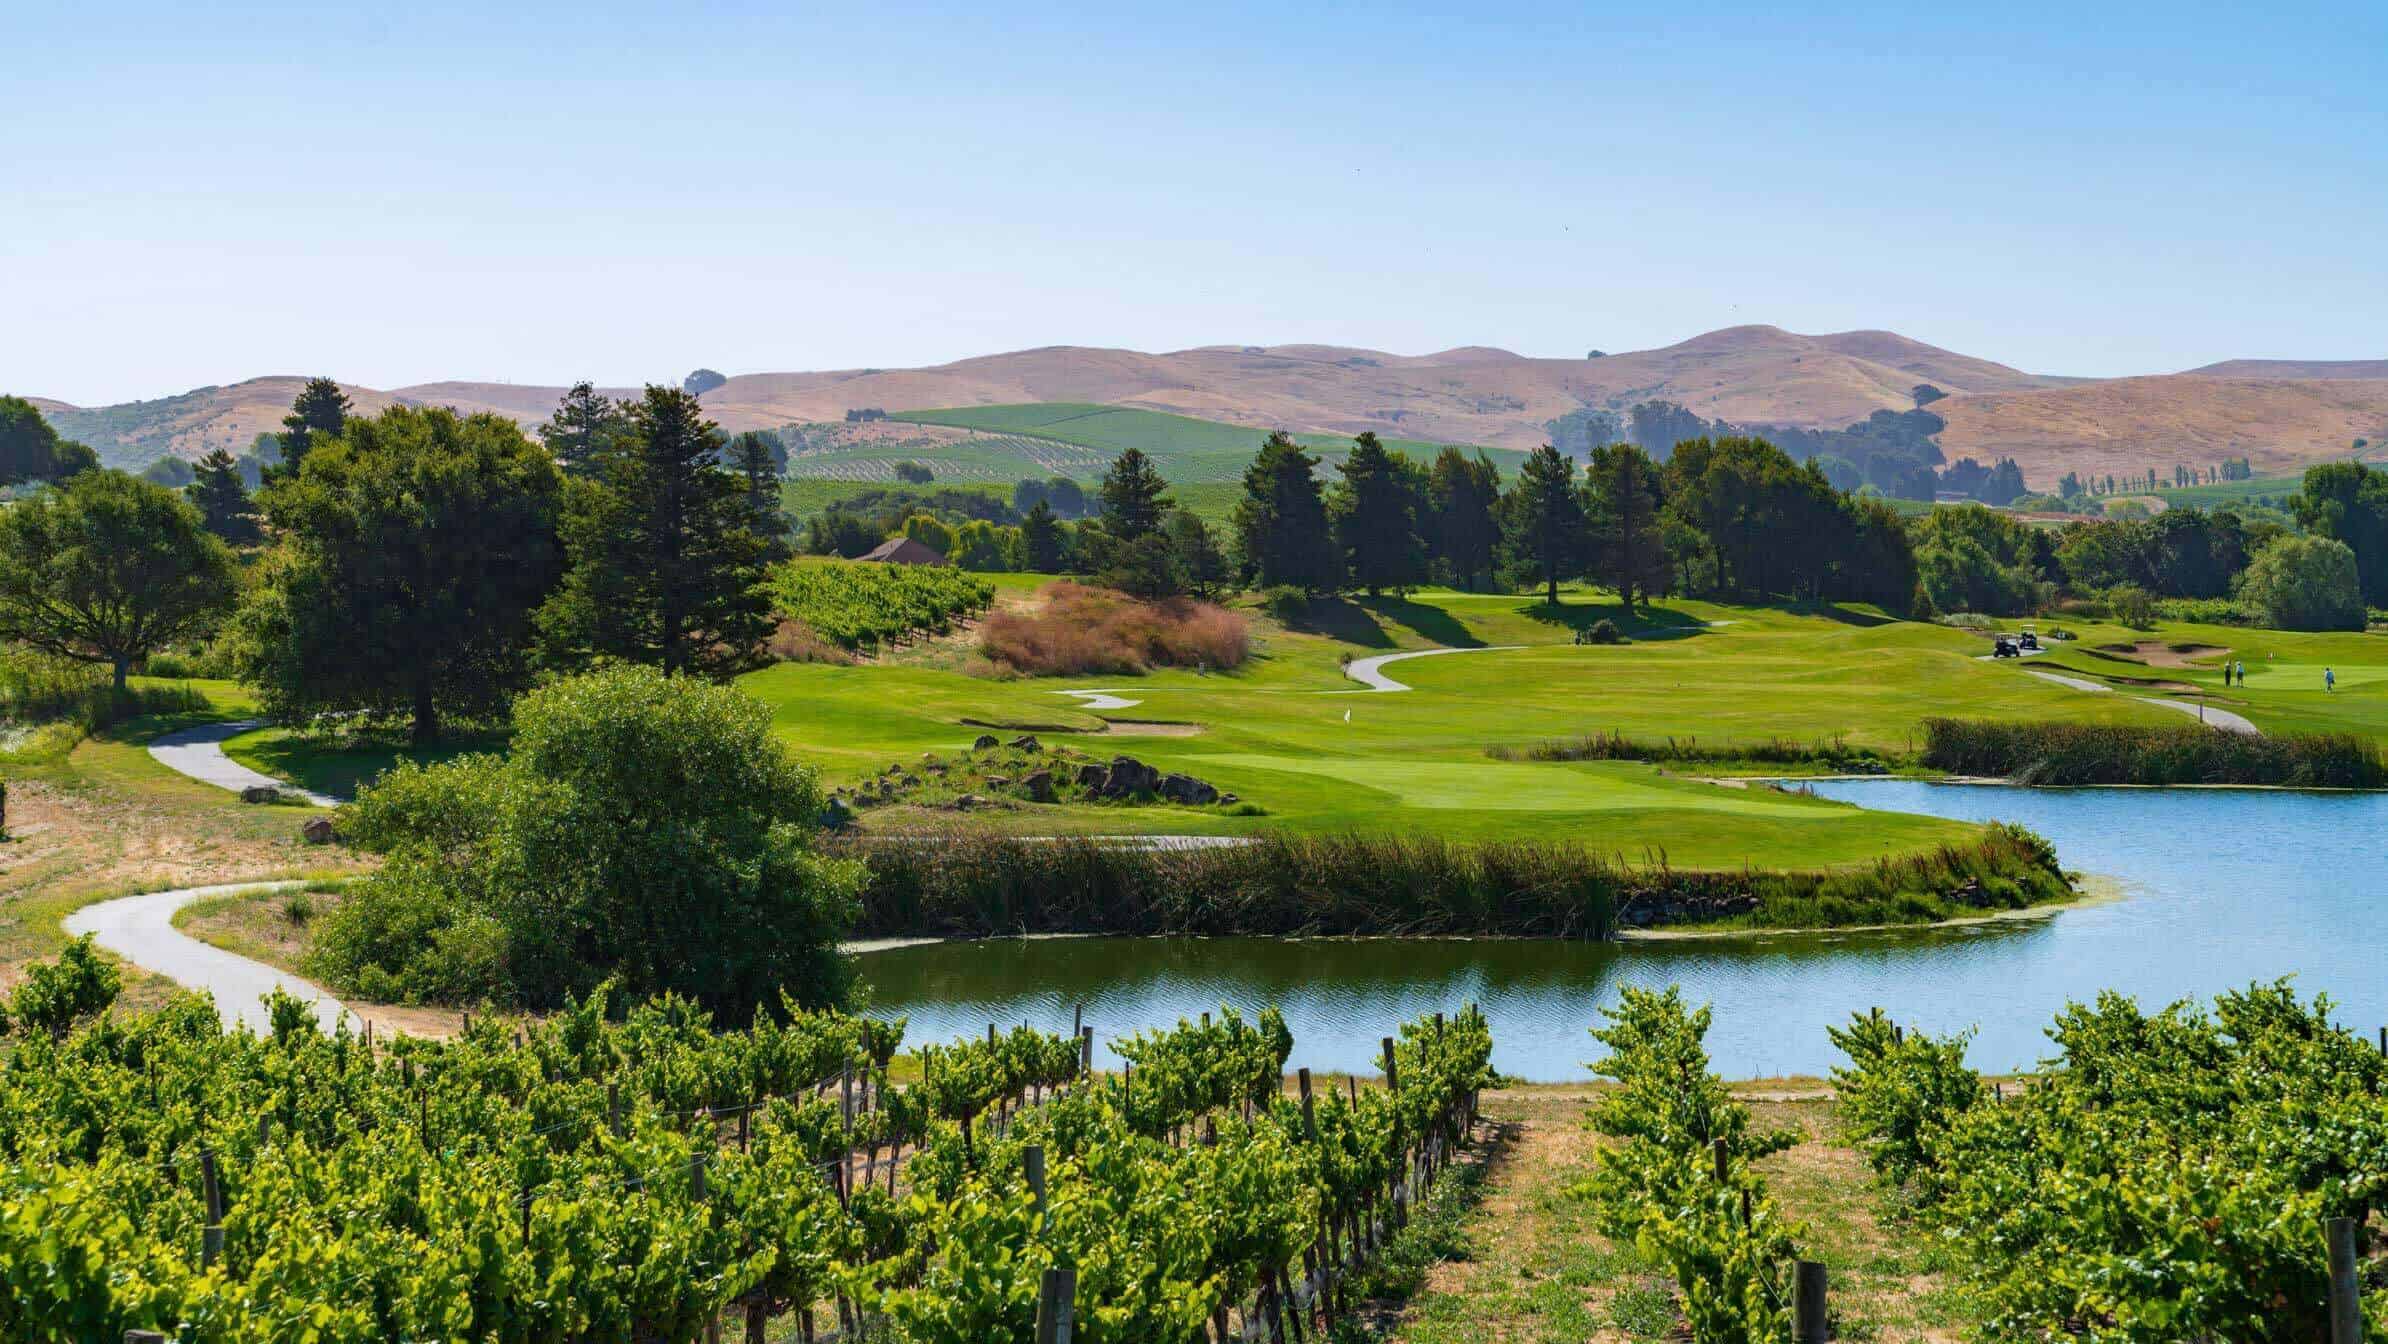 Where your Napa Valley adventure begins...